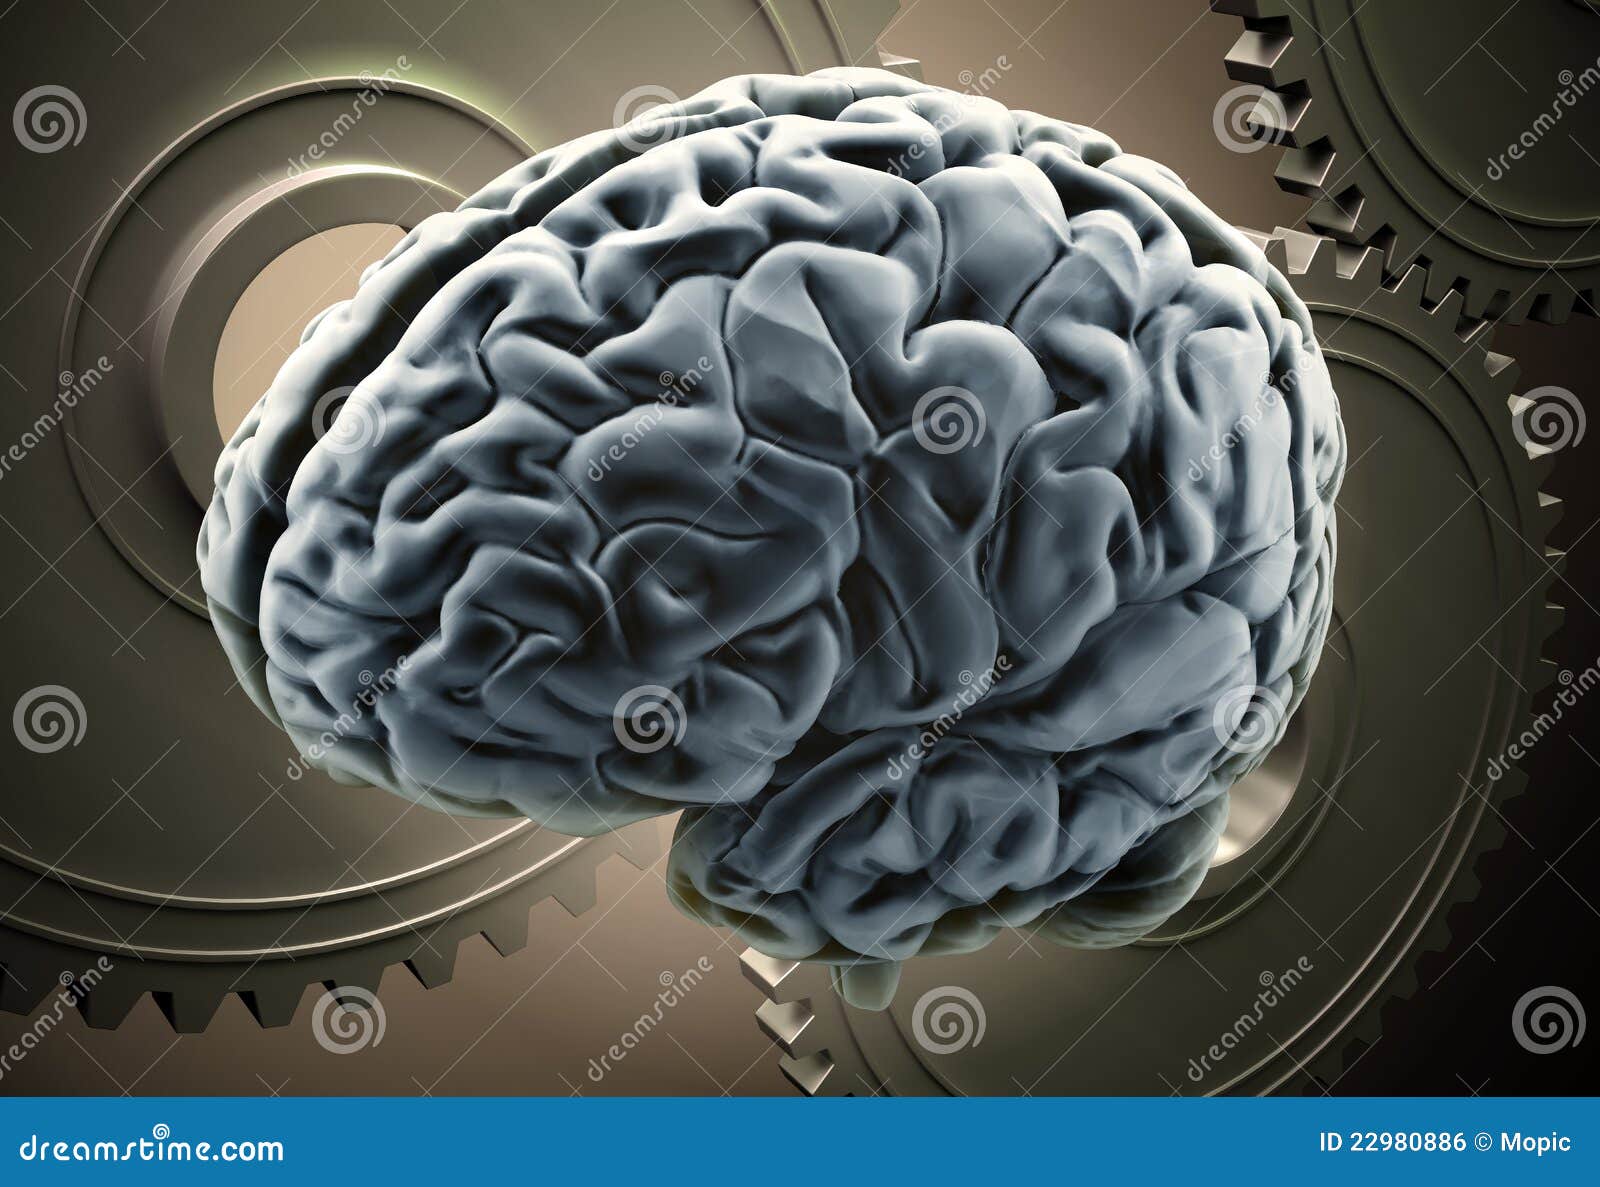 Workings of a human brain concept - brain with gears.